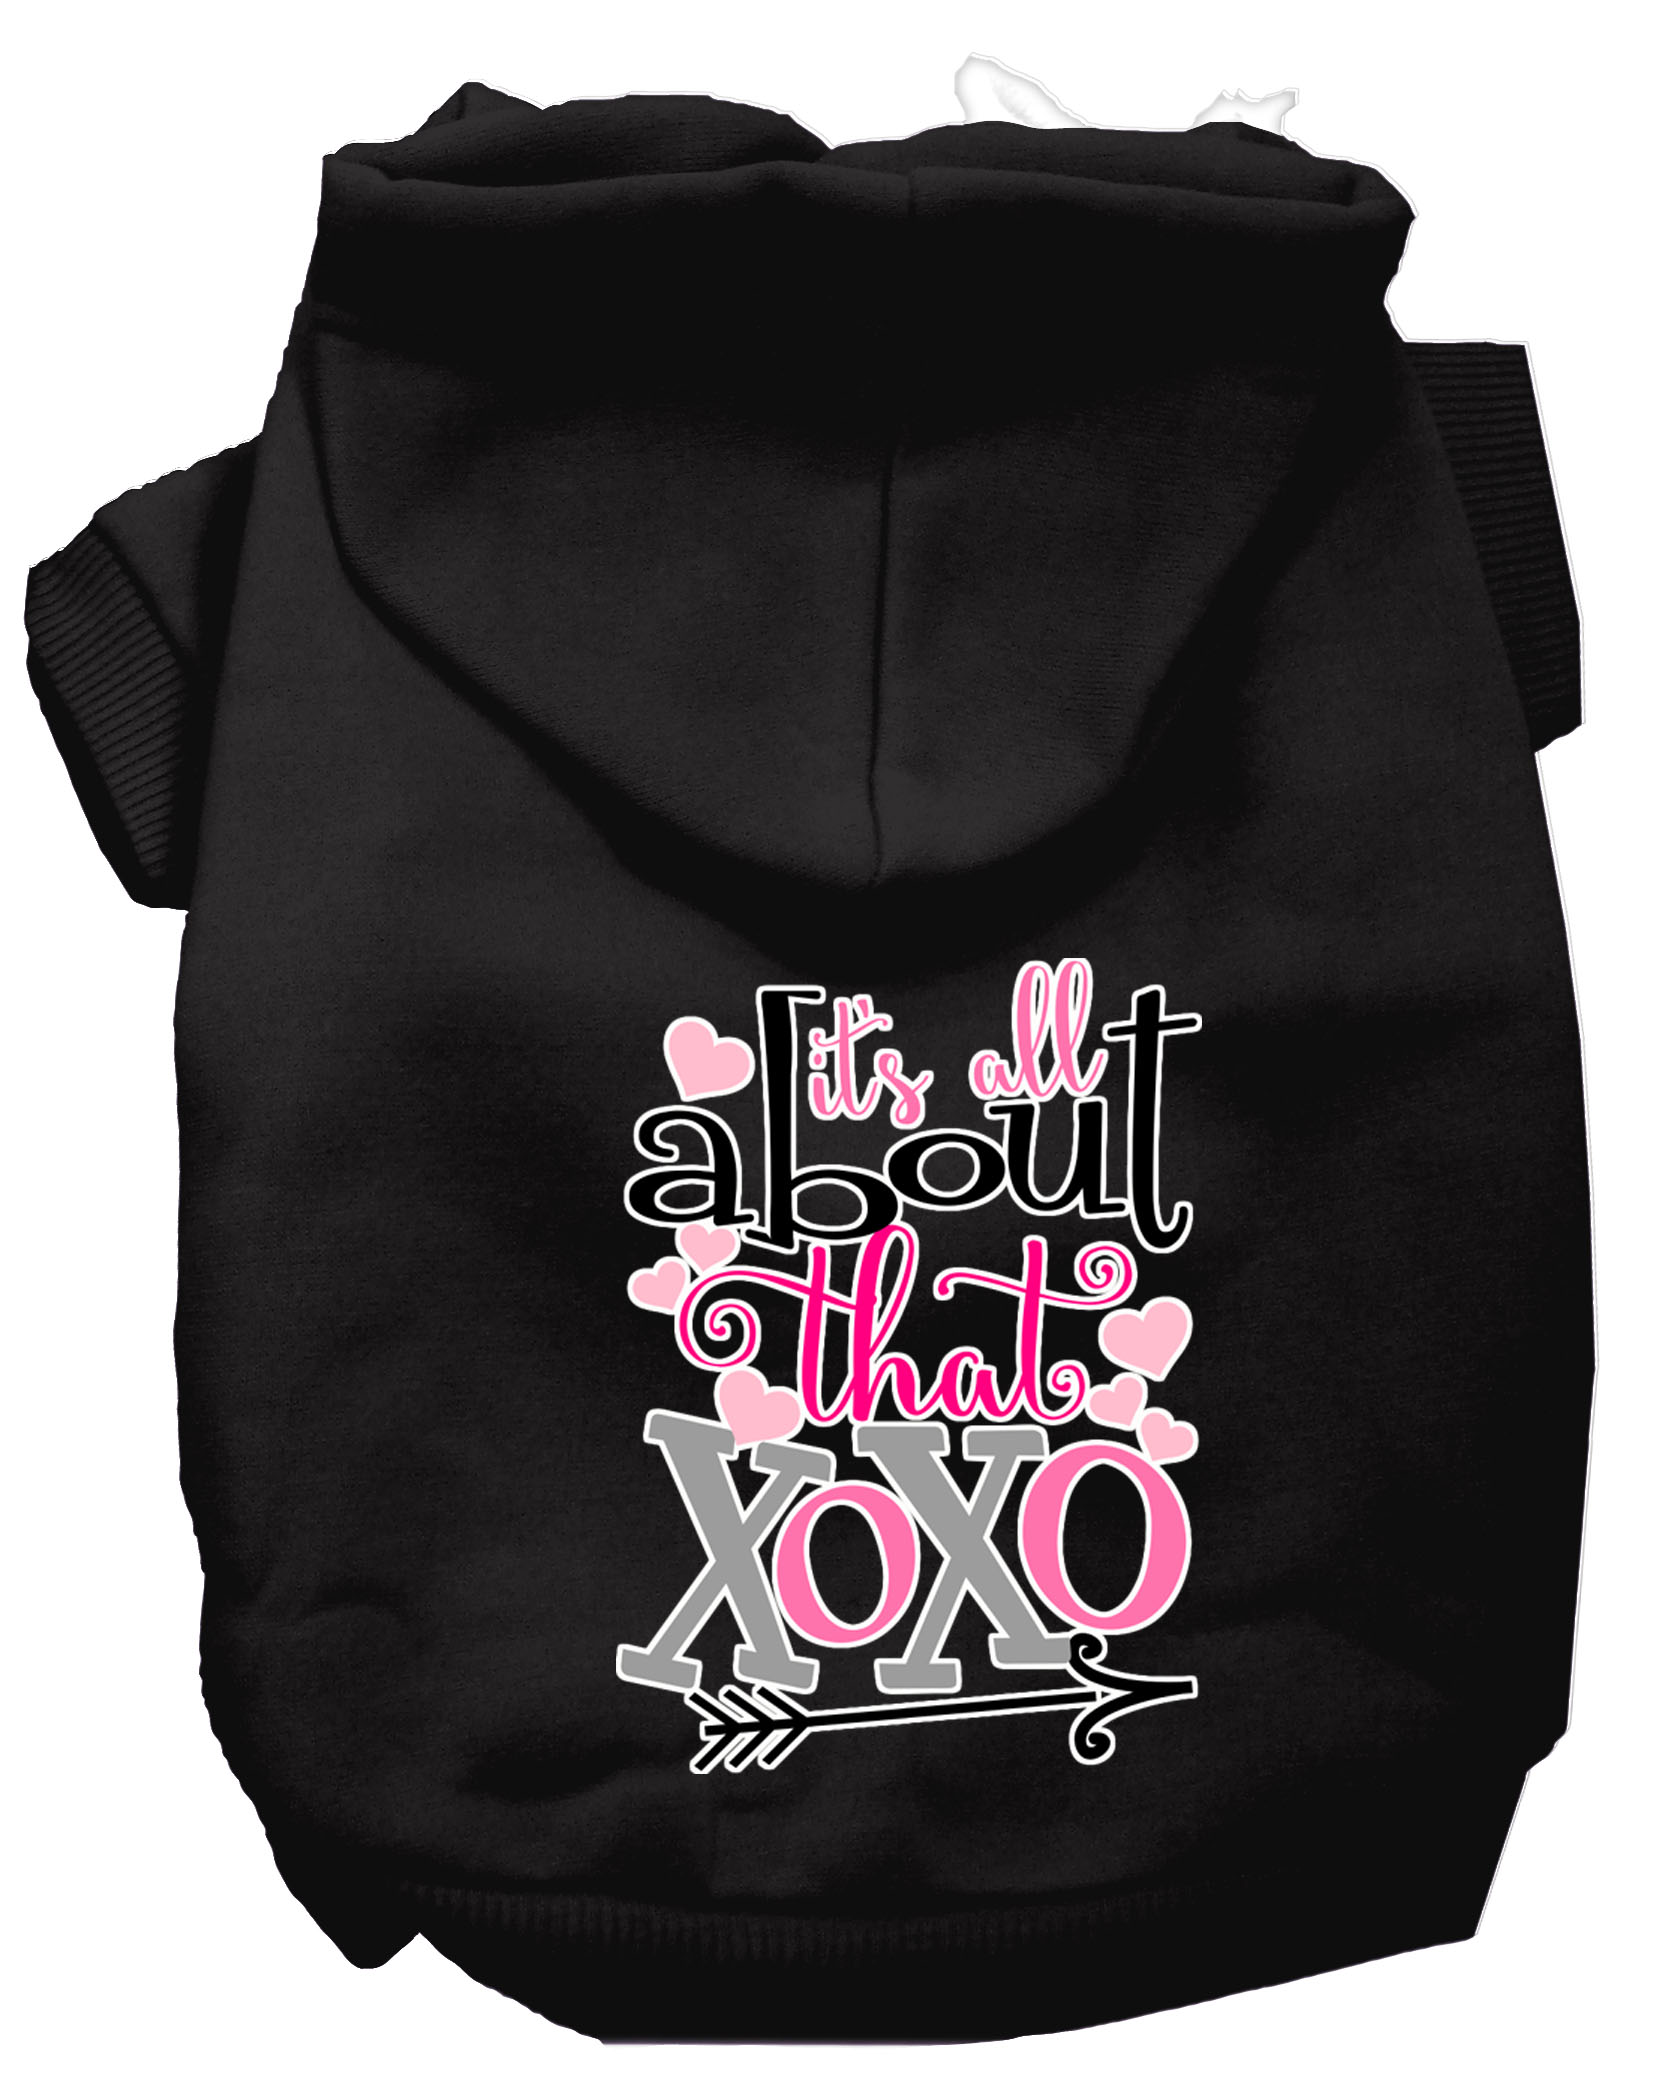 All About that XOXO Screen Print Dog Hoodie Black XL